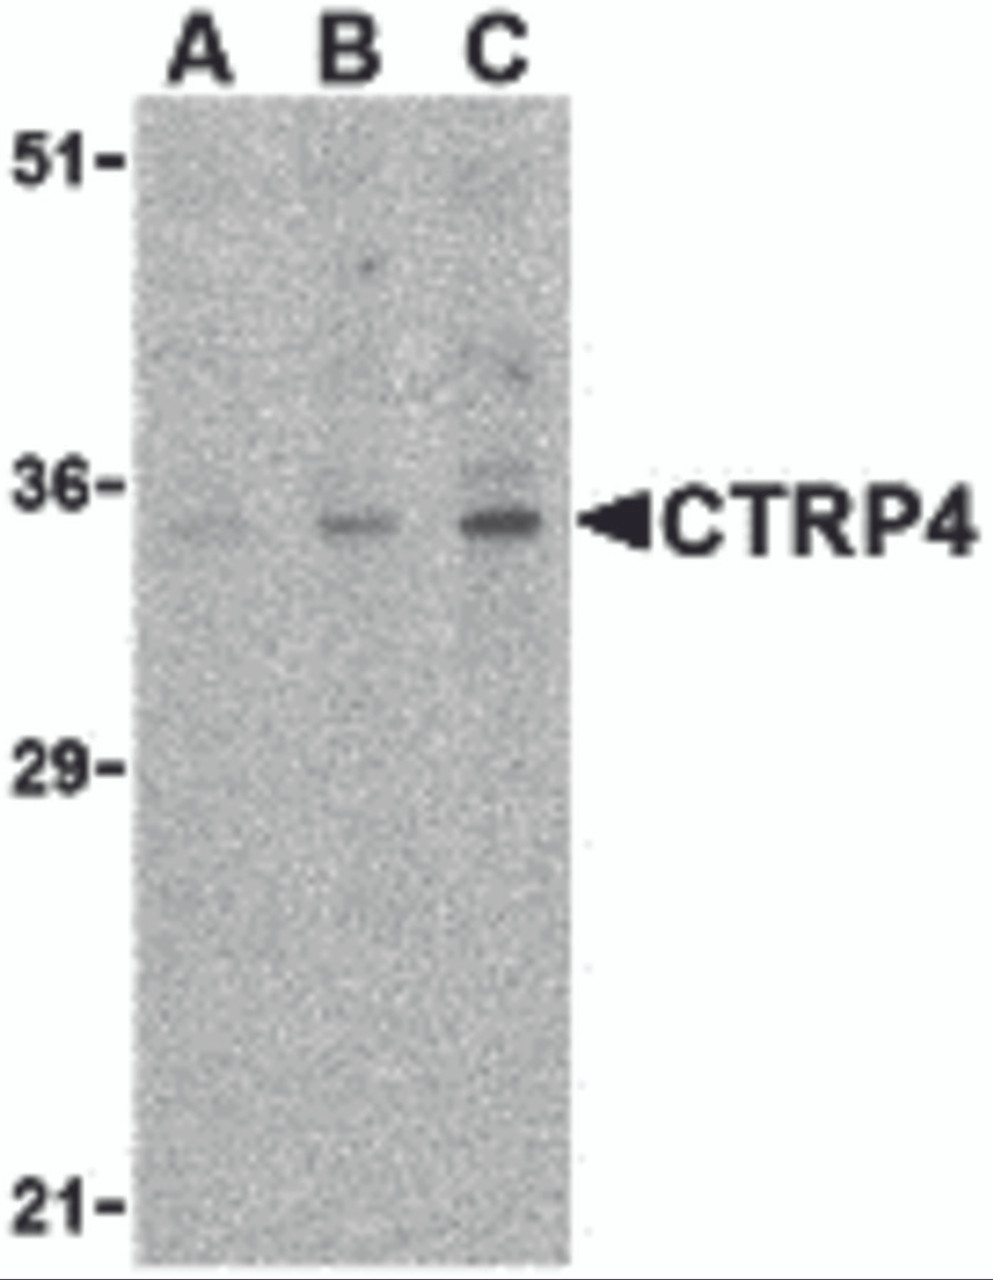 Western blot analysis of CTRP4 in rat brain cell lysate with CTRP4 antibody at (A) 1, (B) 2, and (C) 4 &#956;g/mL.